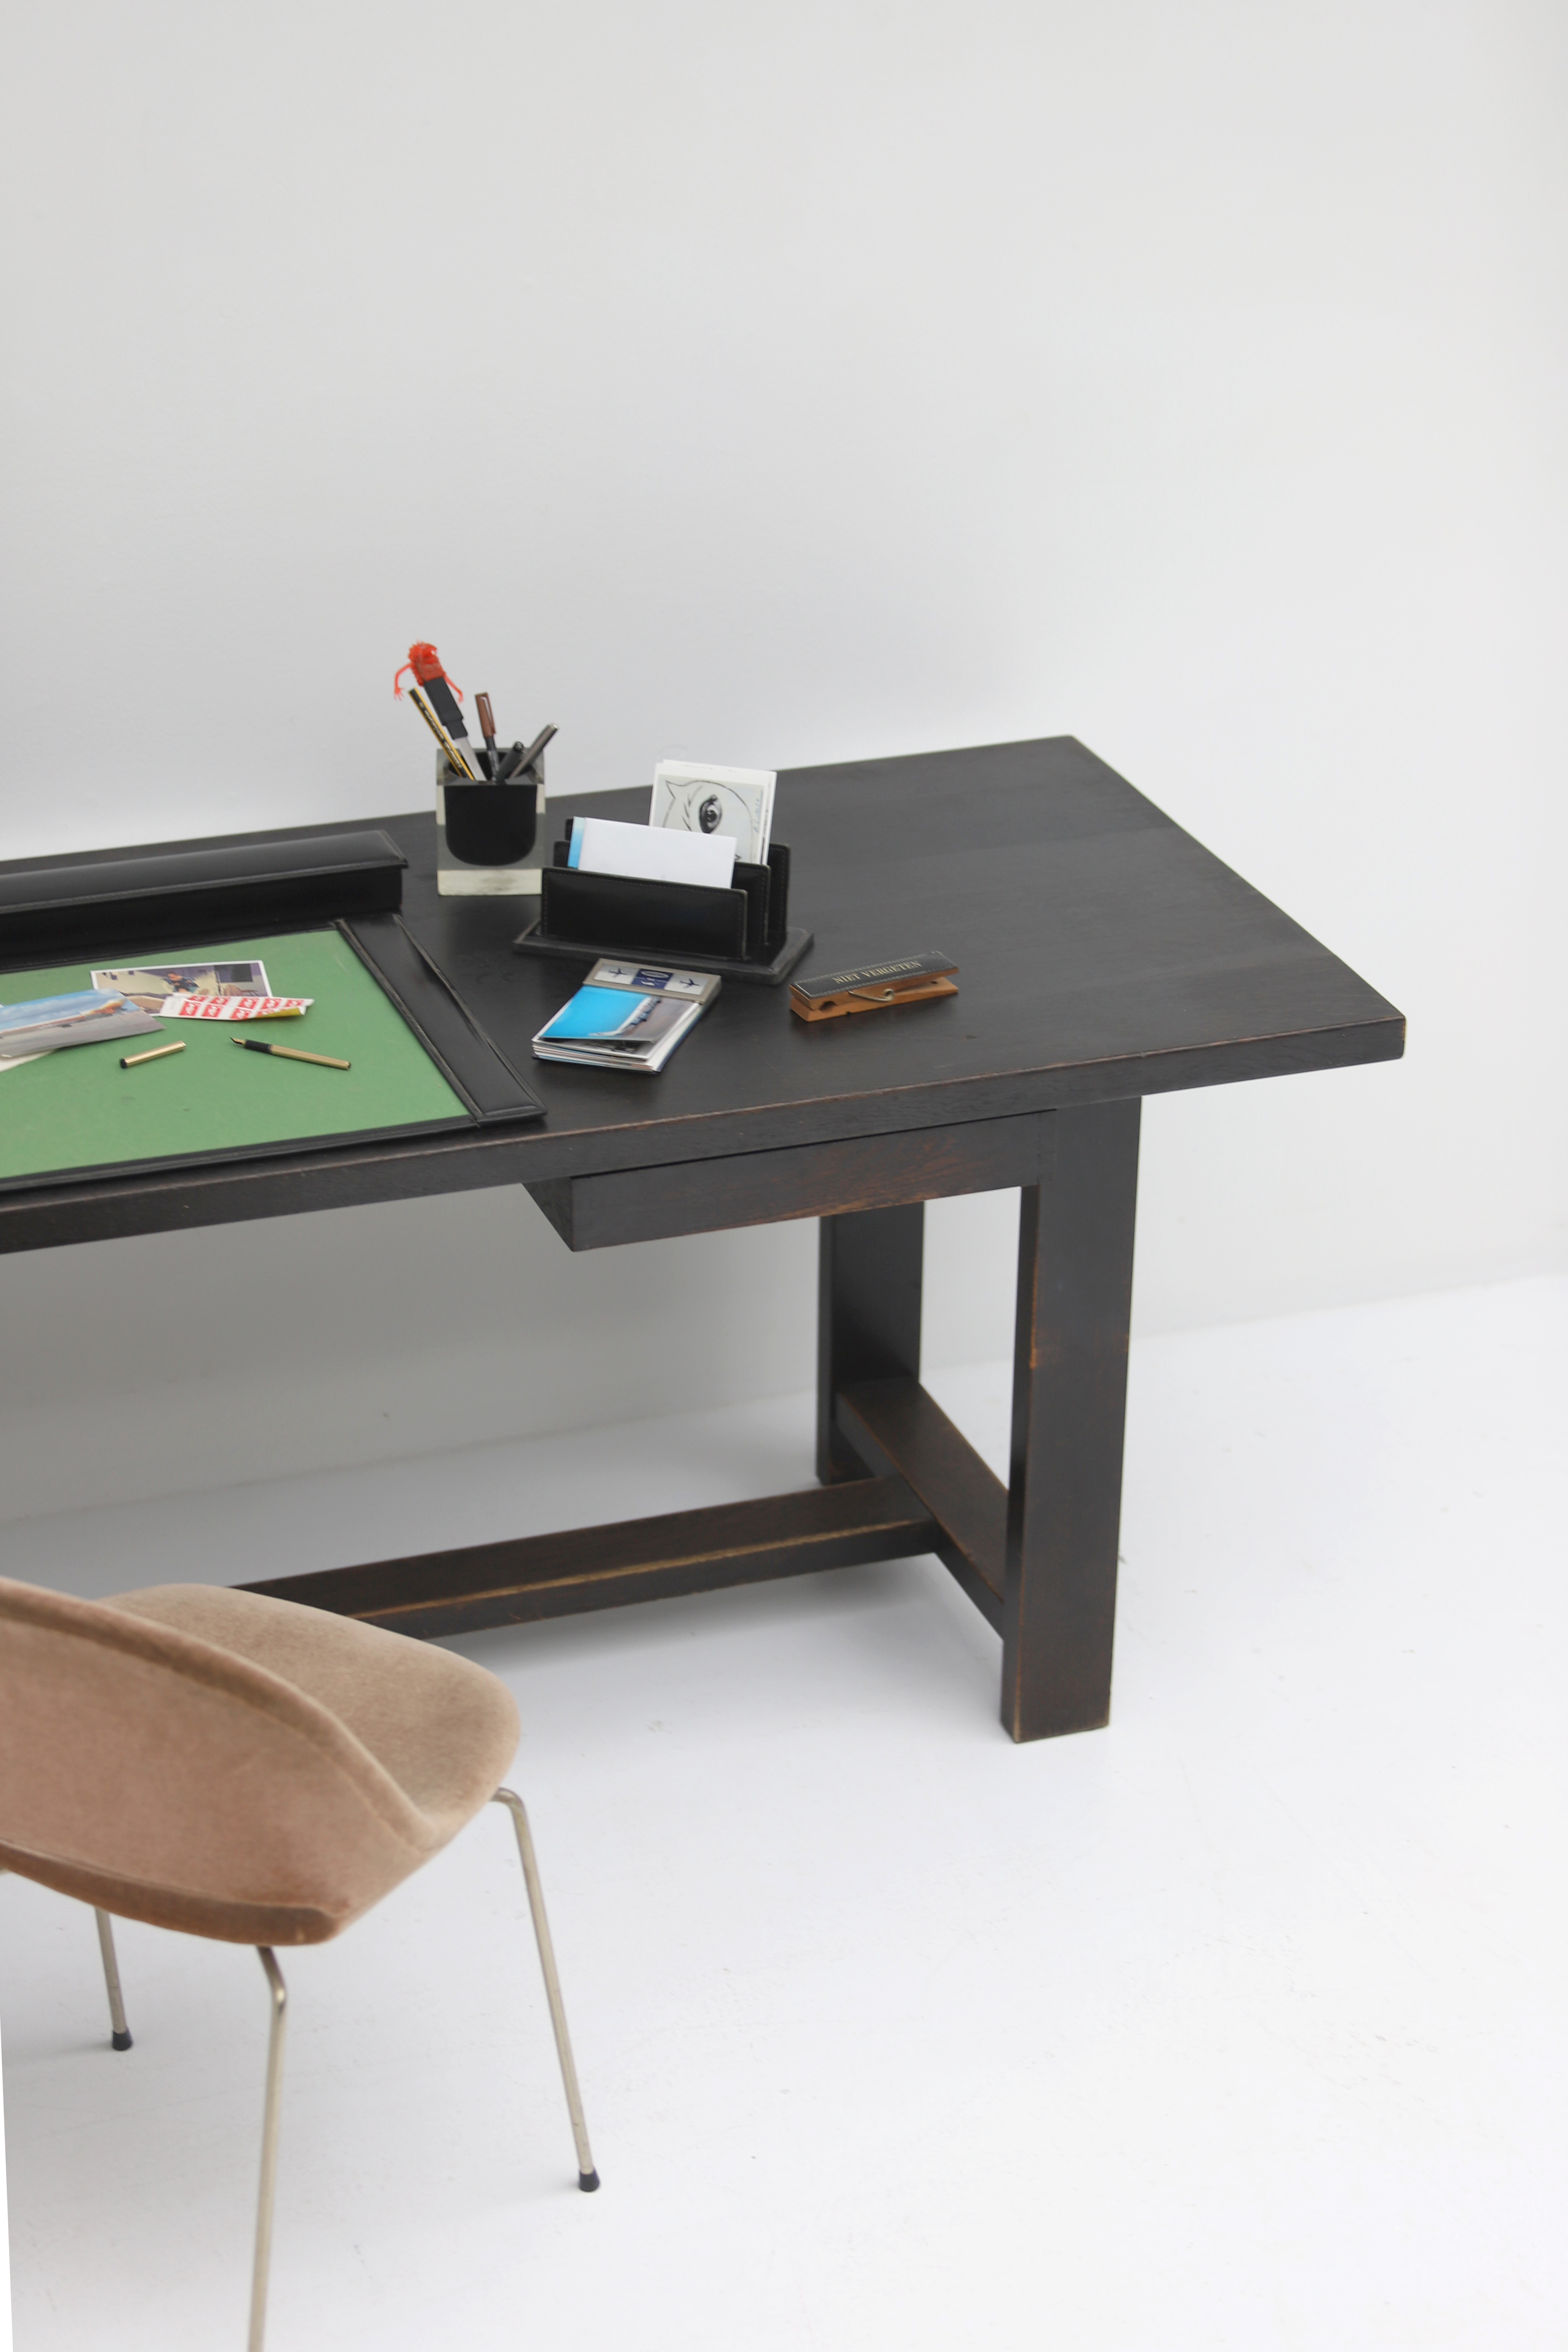 MI Dining Table with Drawersimage 13